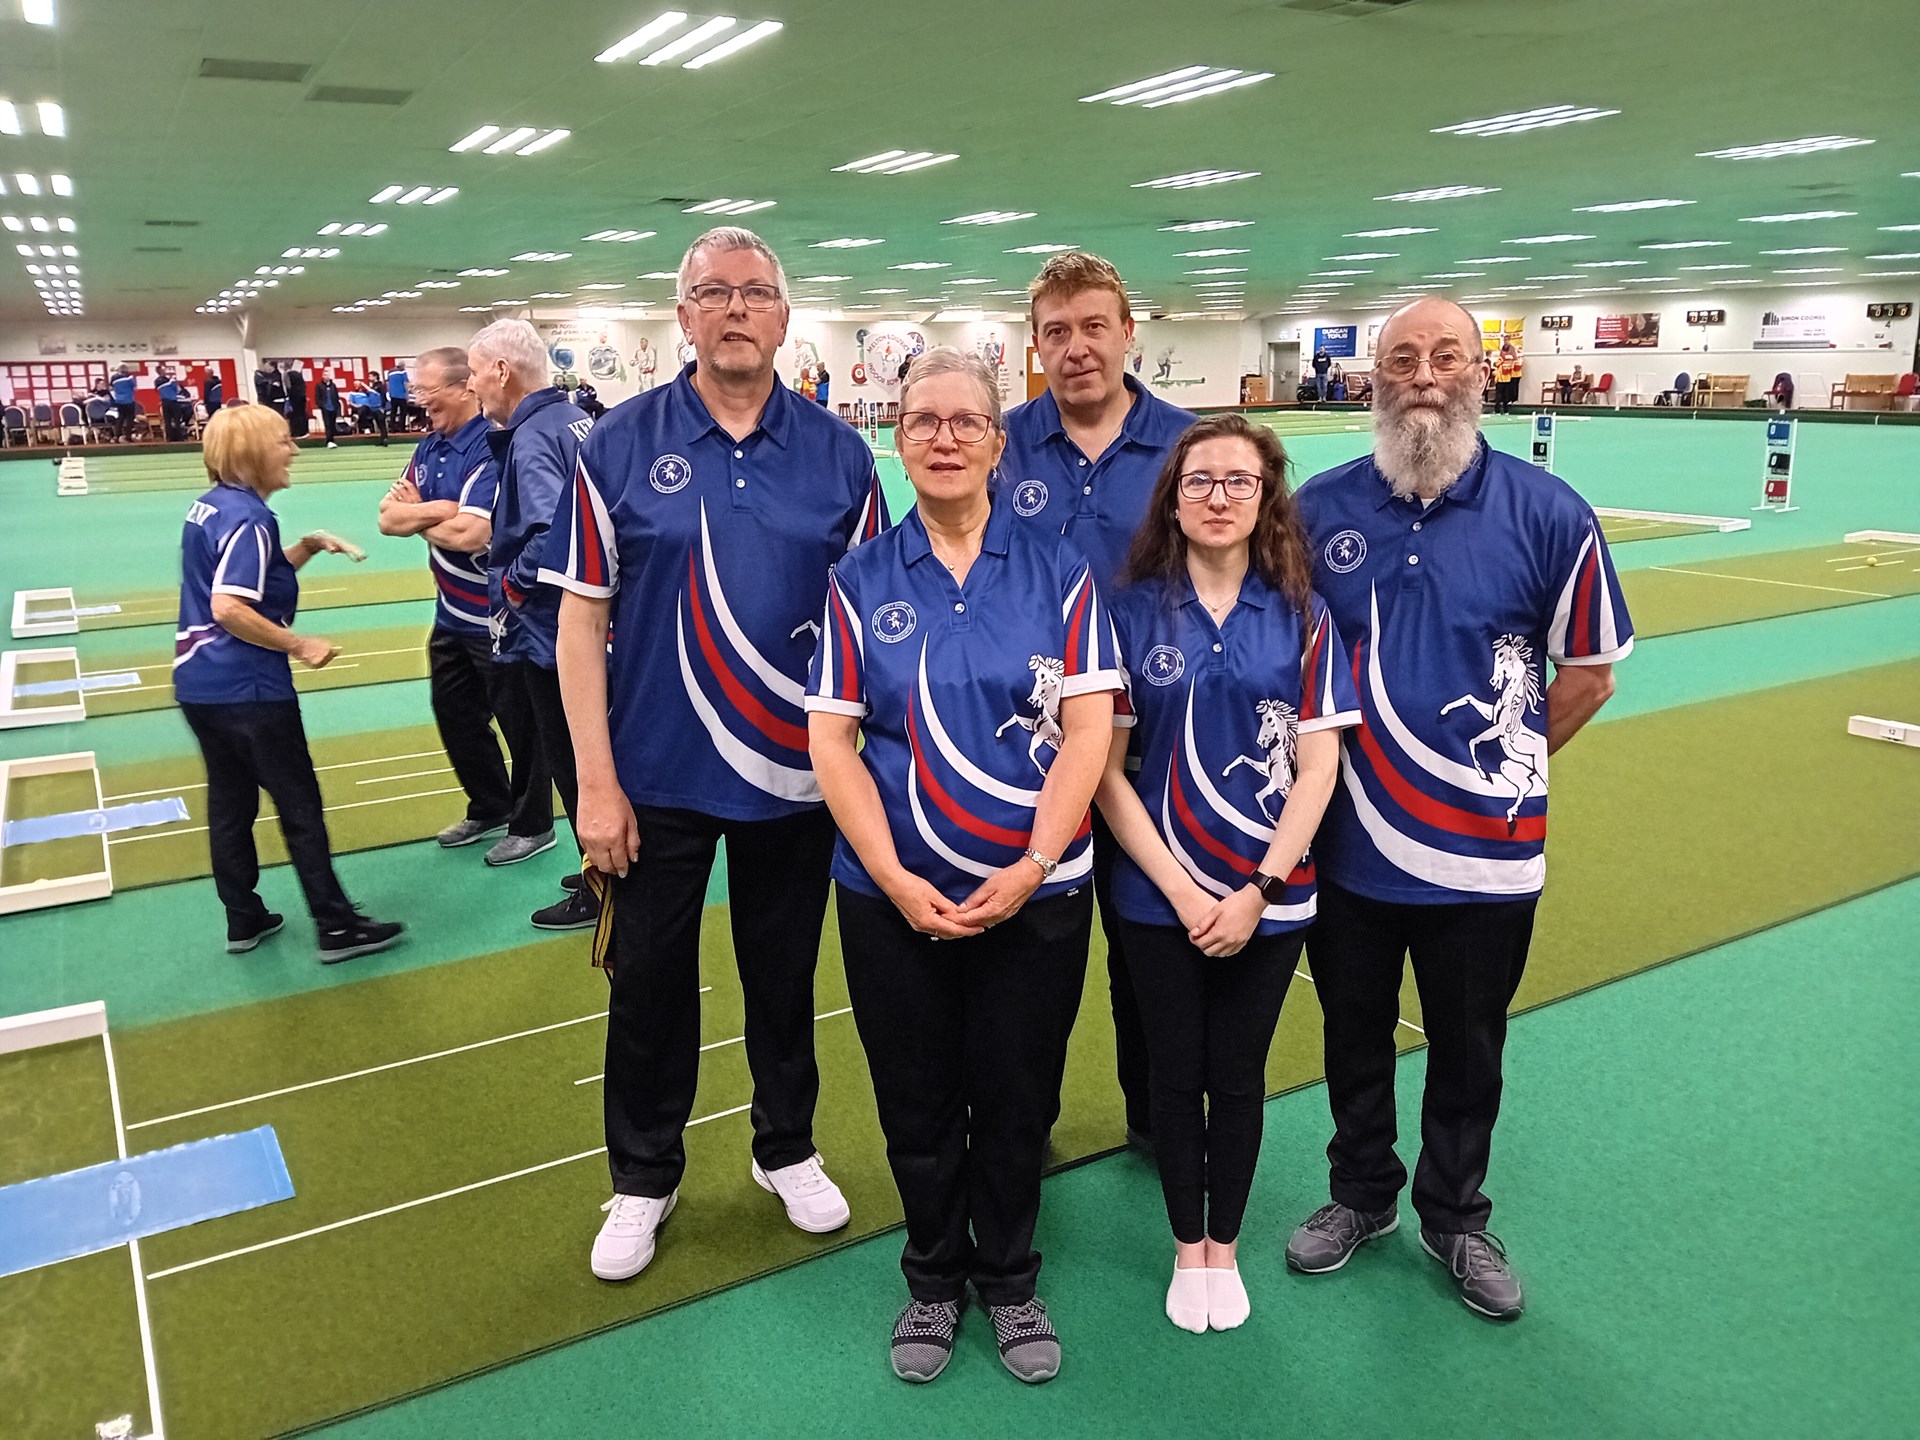 Five bowlers from Hamstreet featured in the winning Kent team in the Inter County Championship final